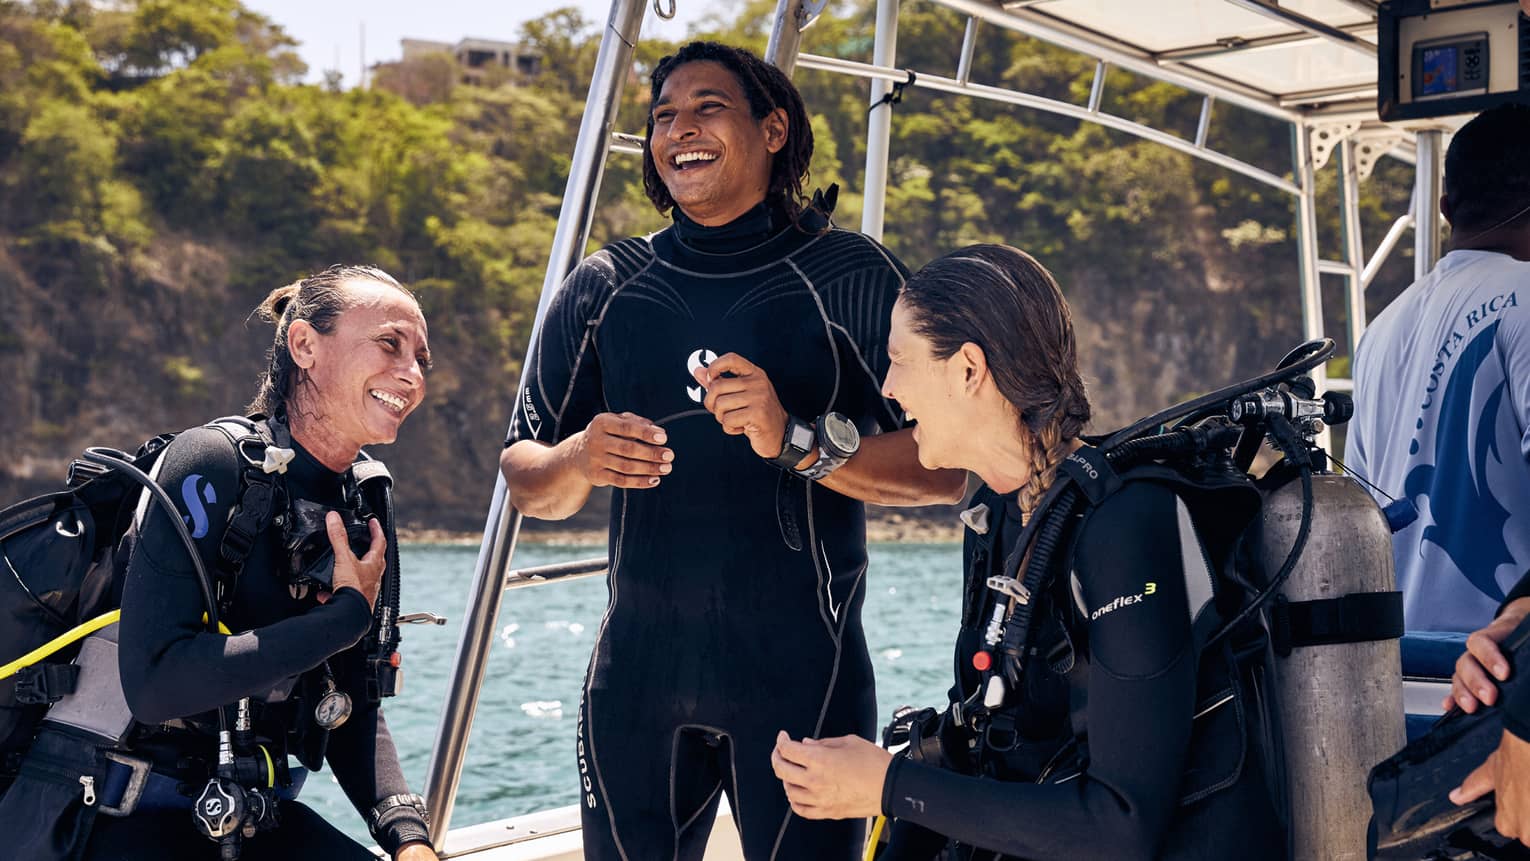 Three scuba-divers in wetsuits laugh under the canopy of a boat on sparkling turquoise water amid a rocky tree-covered cliff.